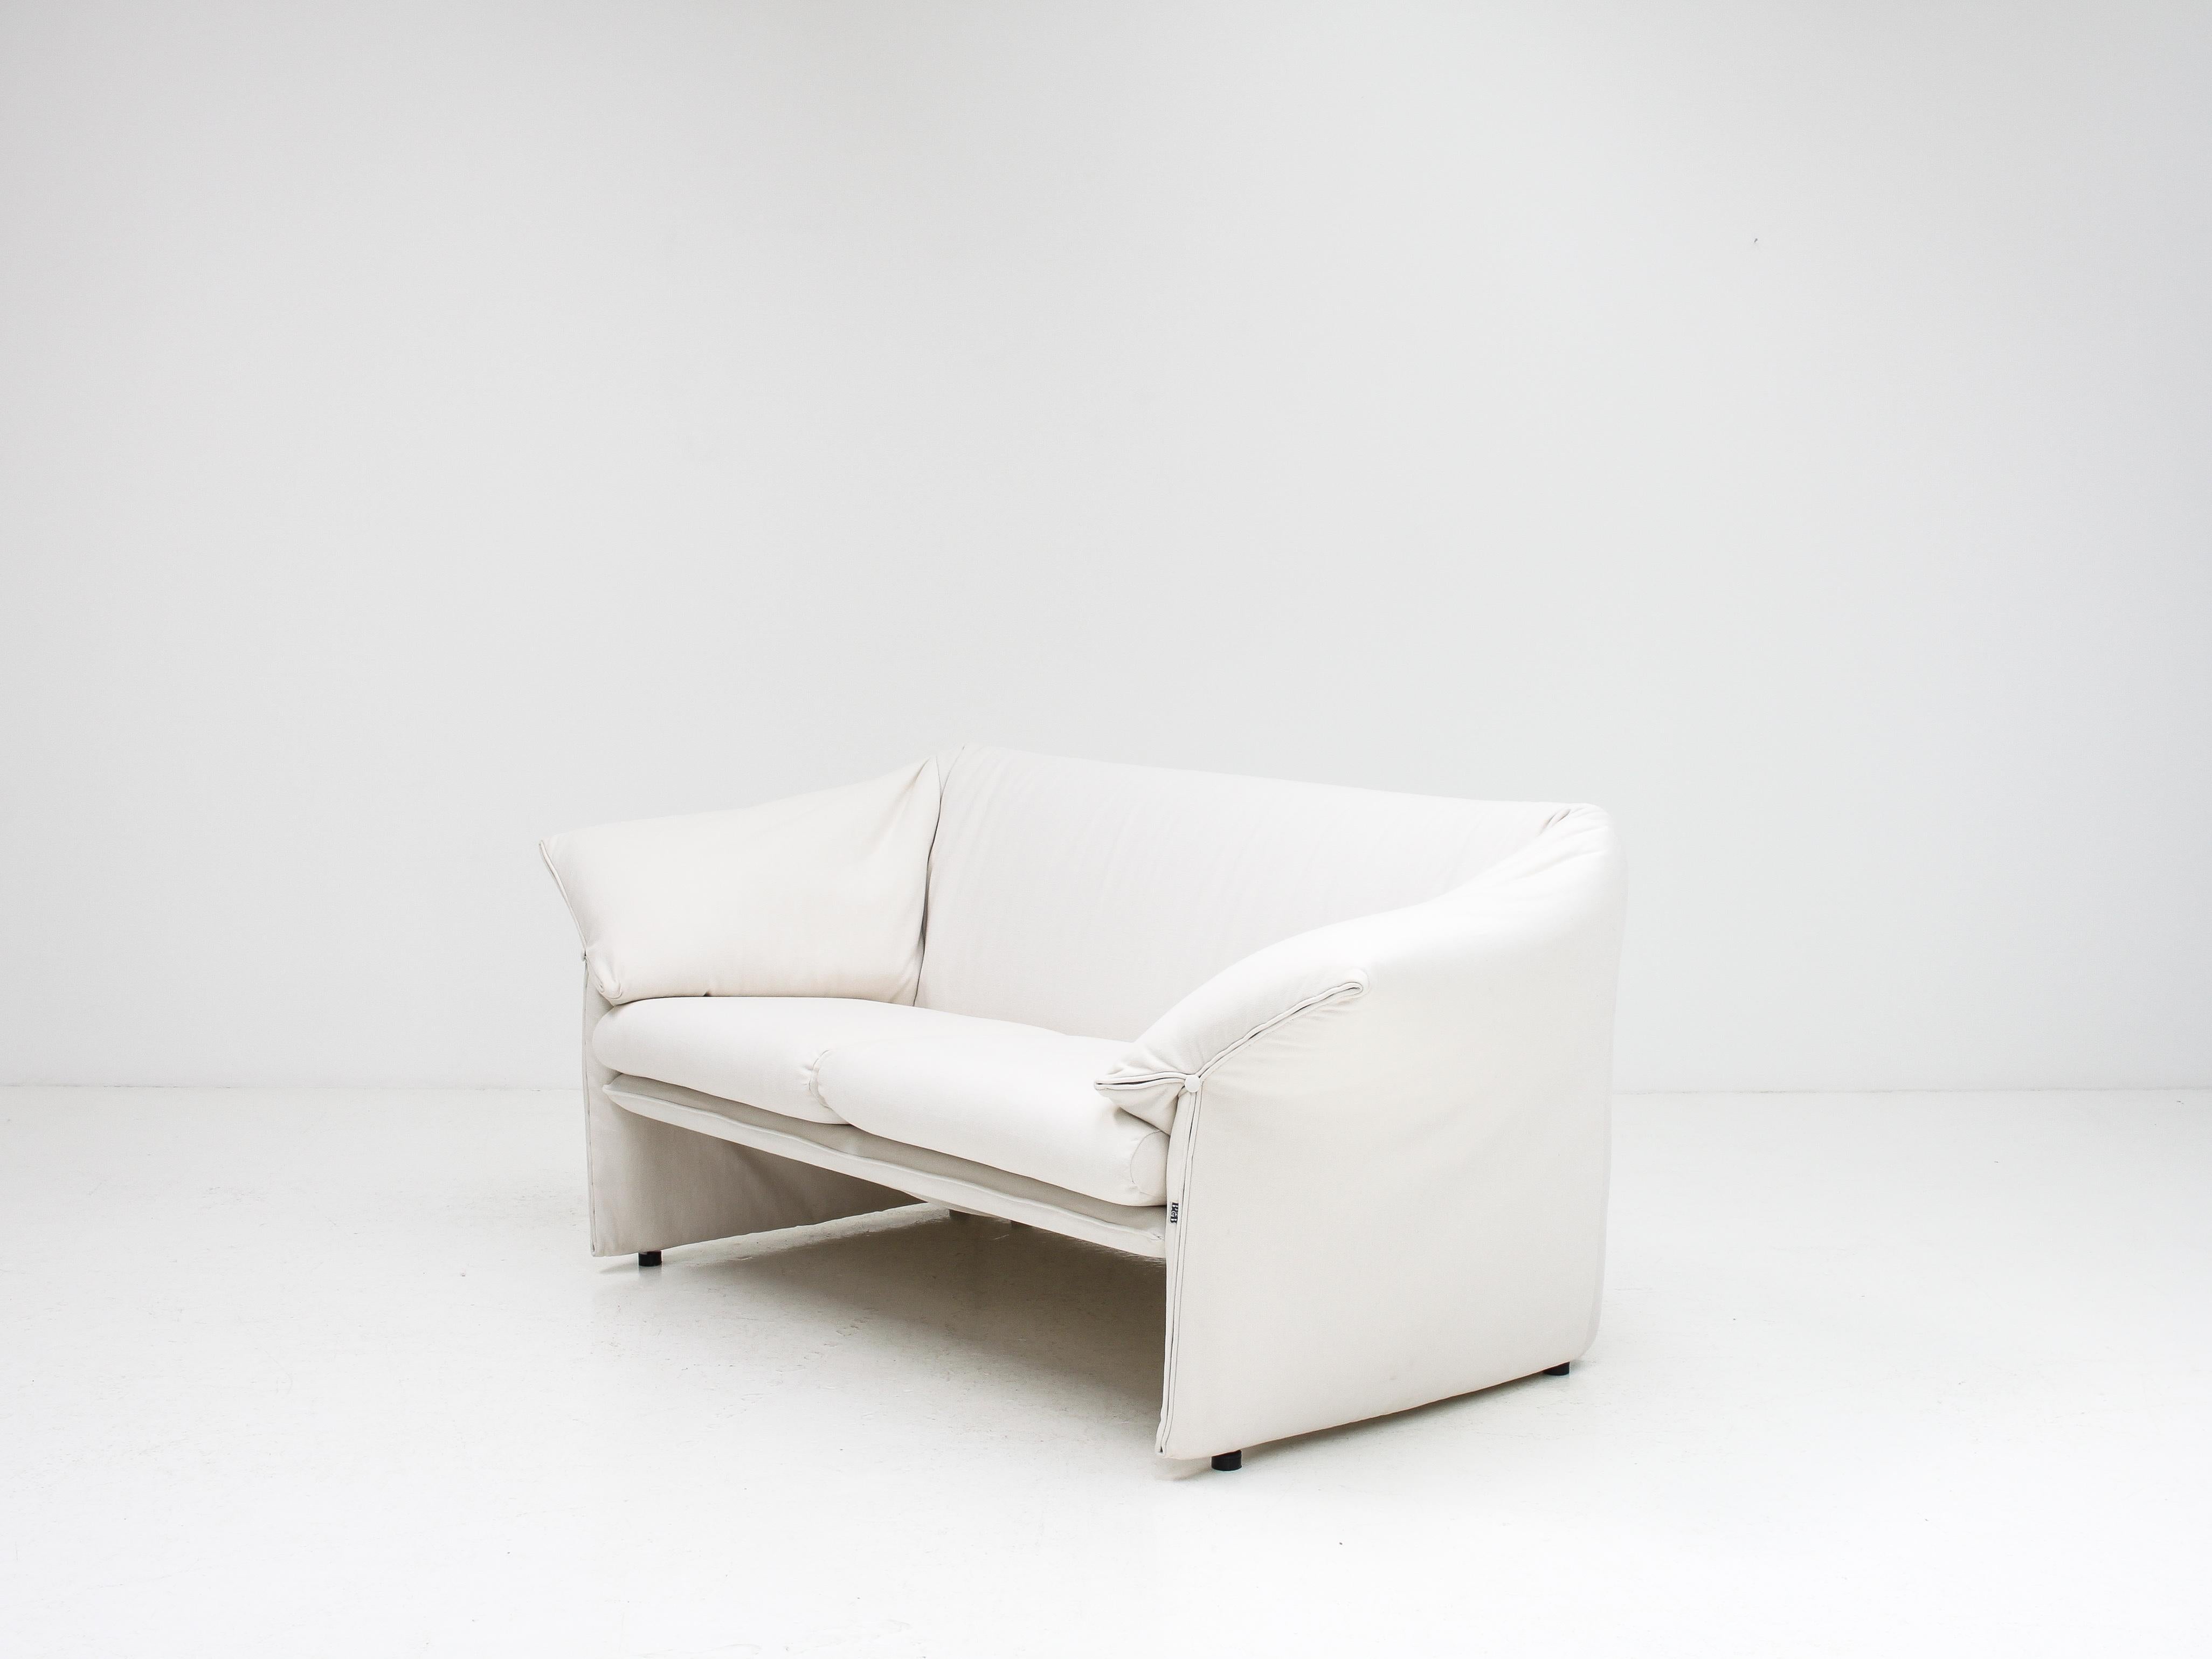  'Le Stelle' Loveseat Sofa by Mario Bellini for B&B Italia, 1974, Reupholstered 1